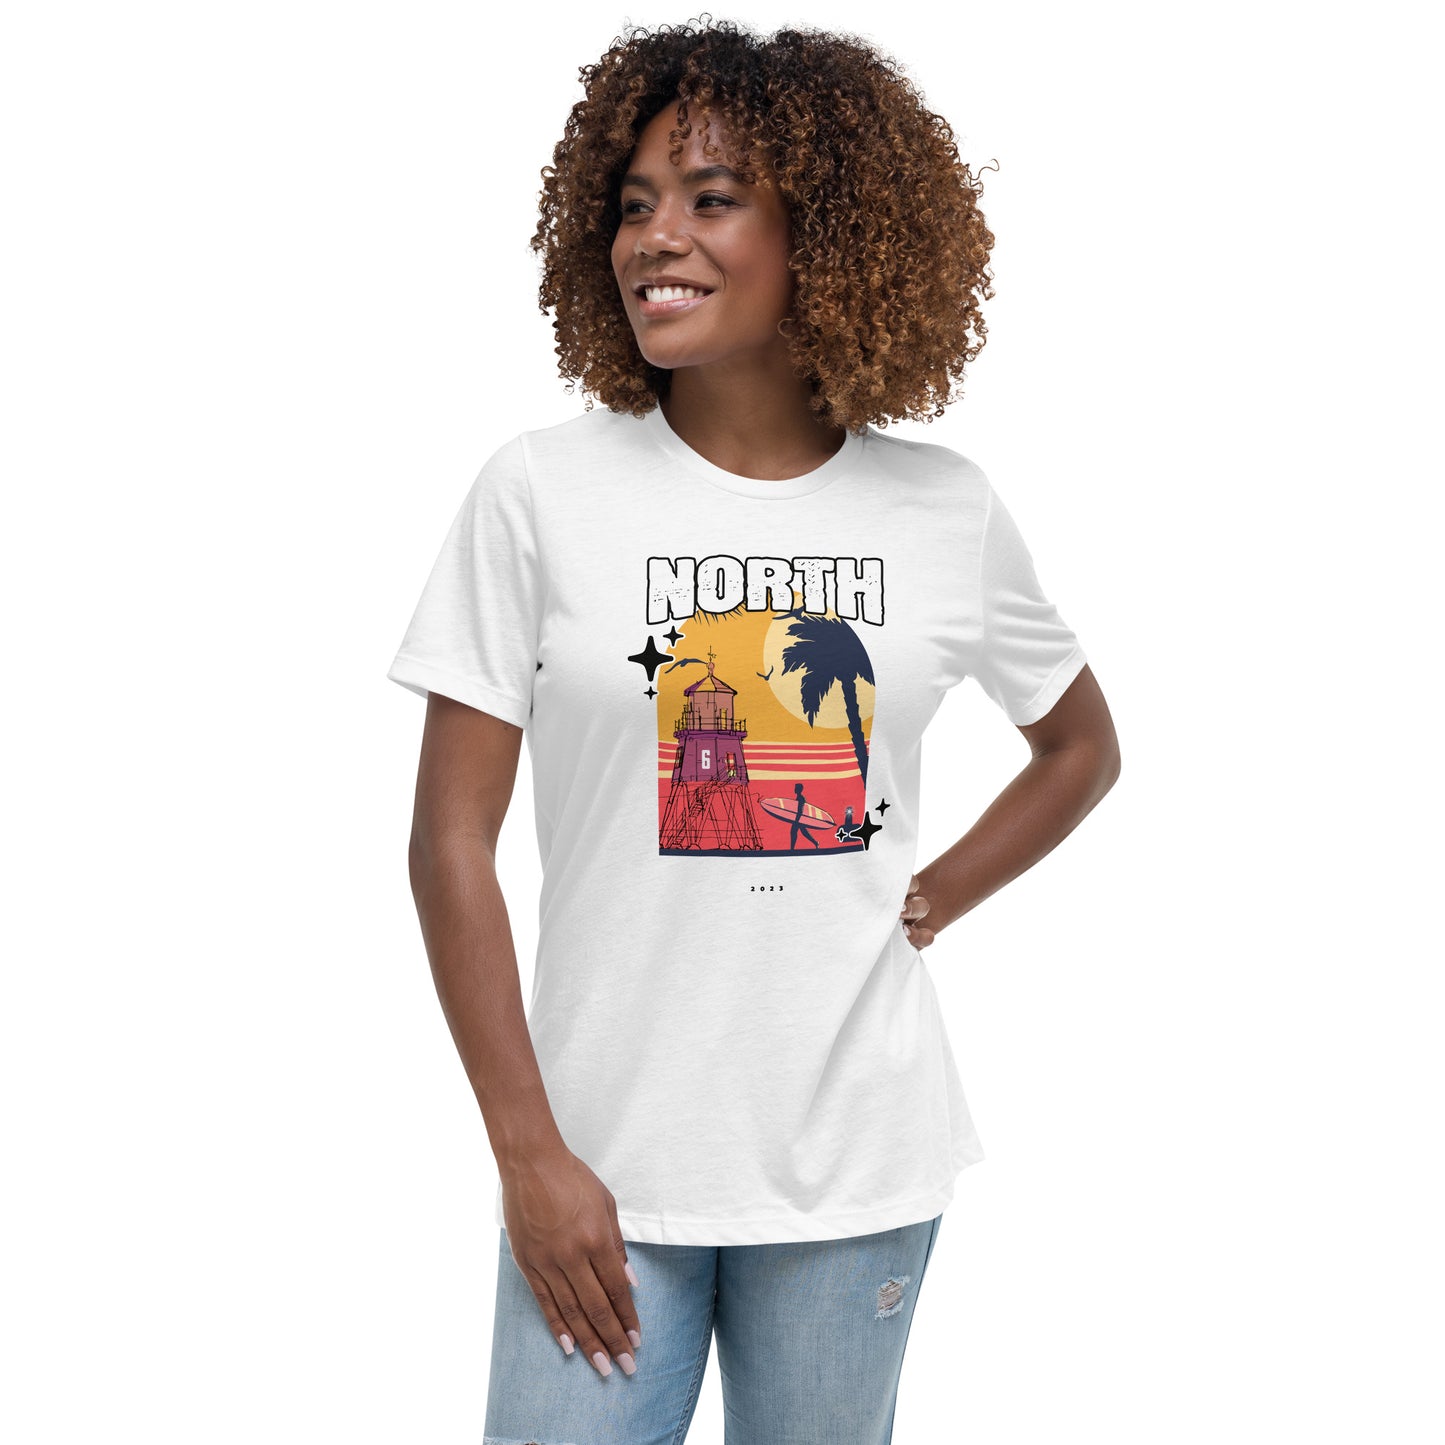 Women's Relaxed T-Shirt its grim up north